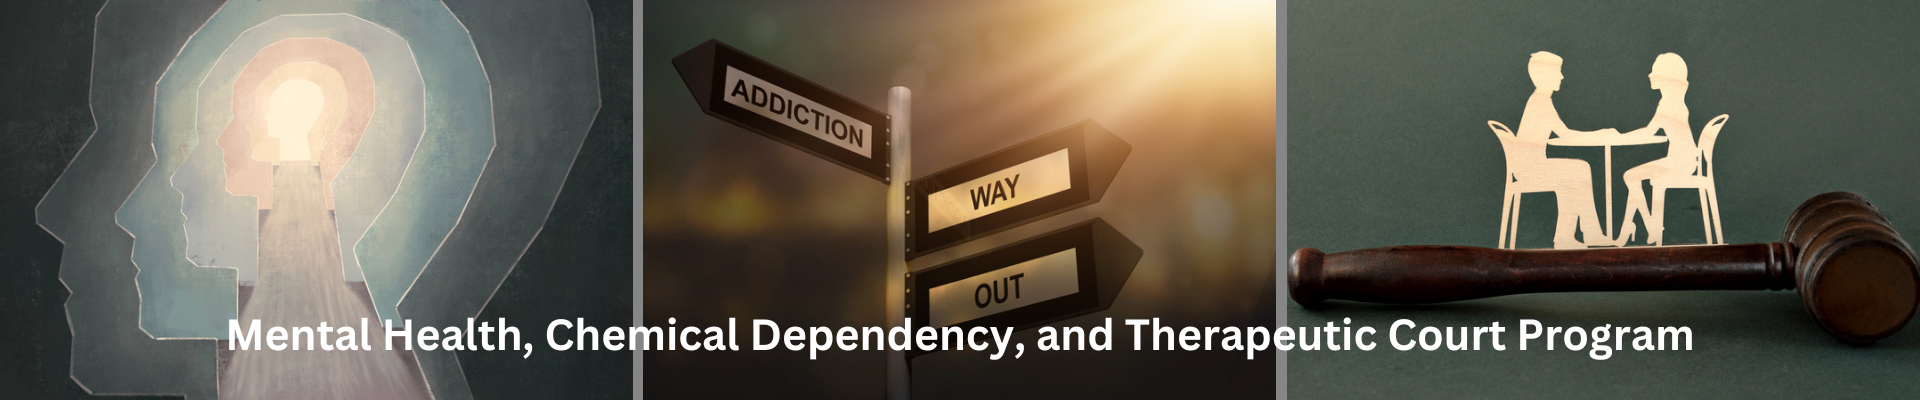 mental health, chemical dependency, and therapeutic court program banner